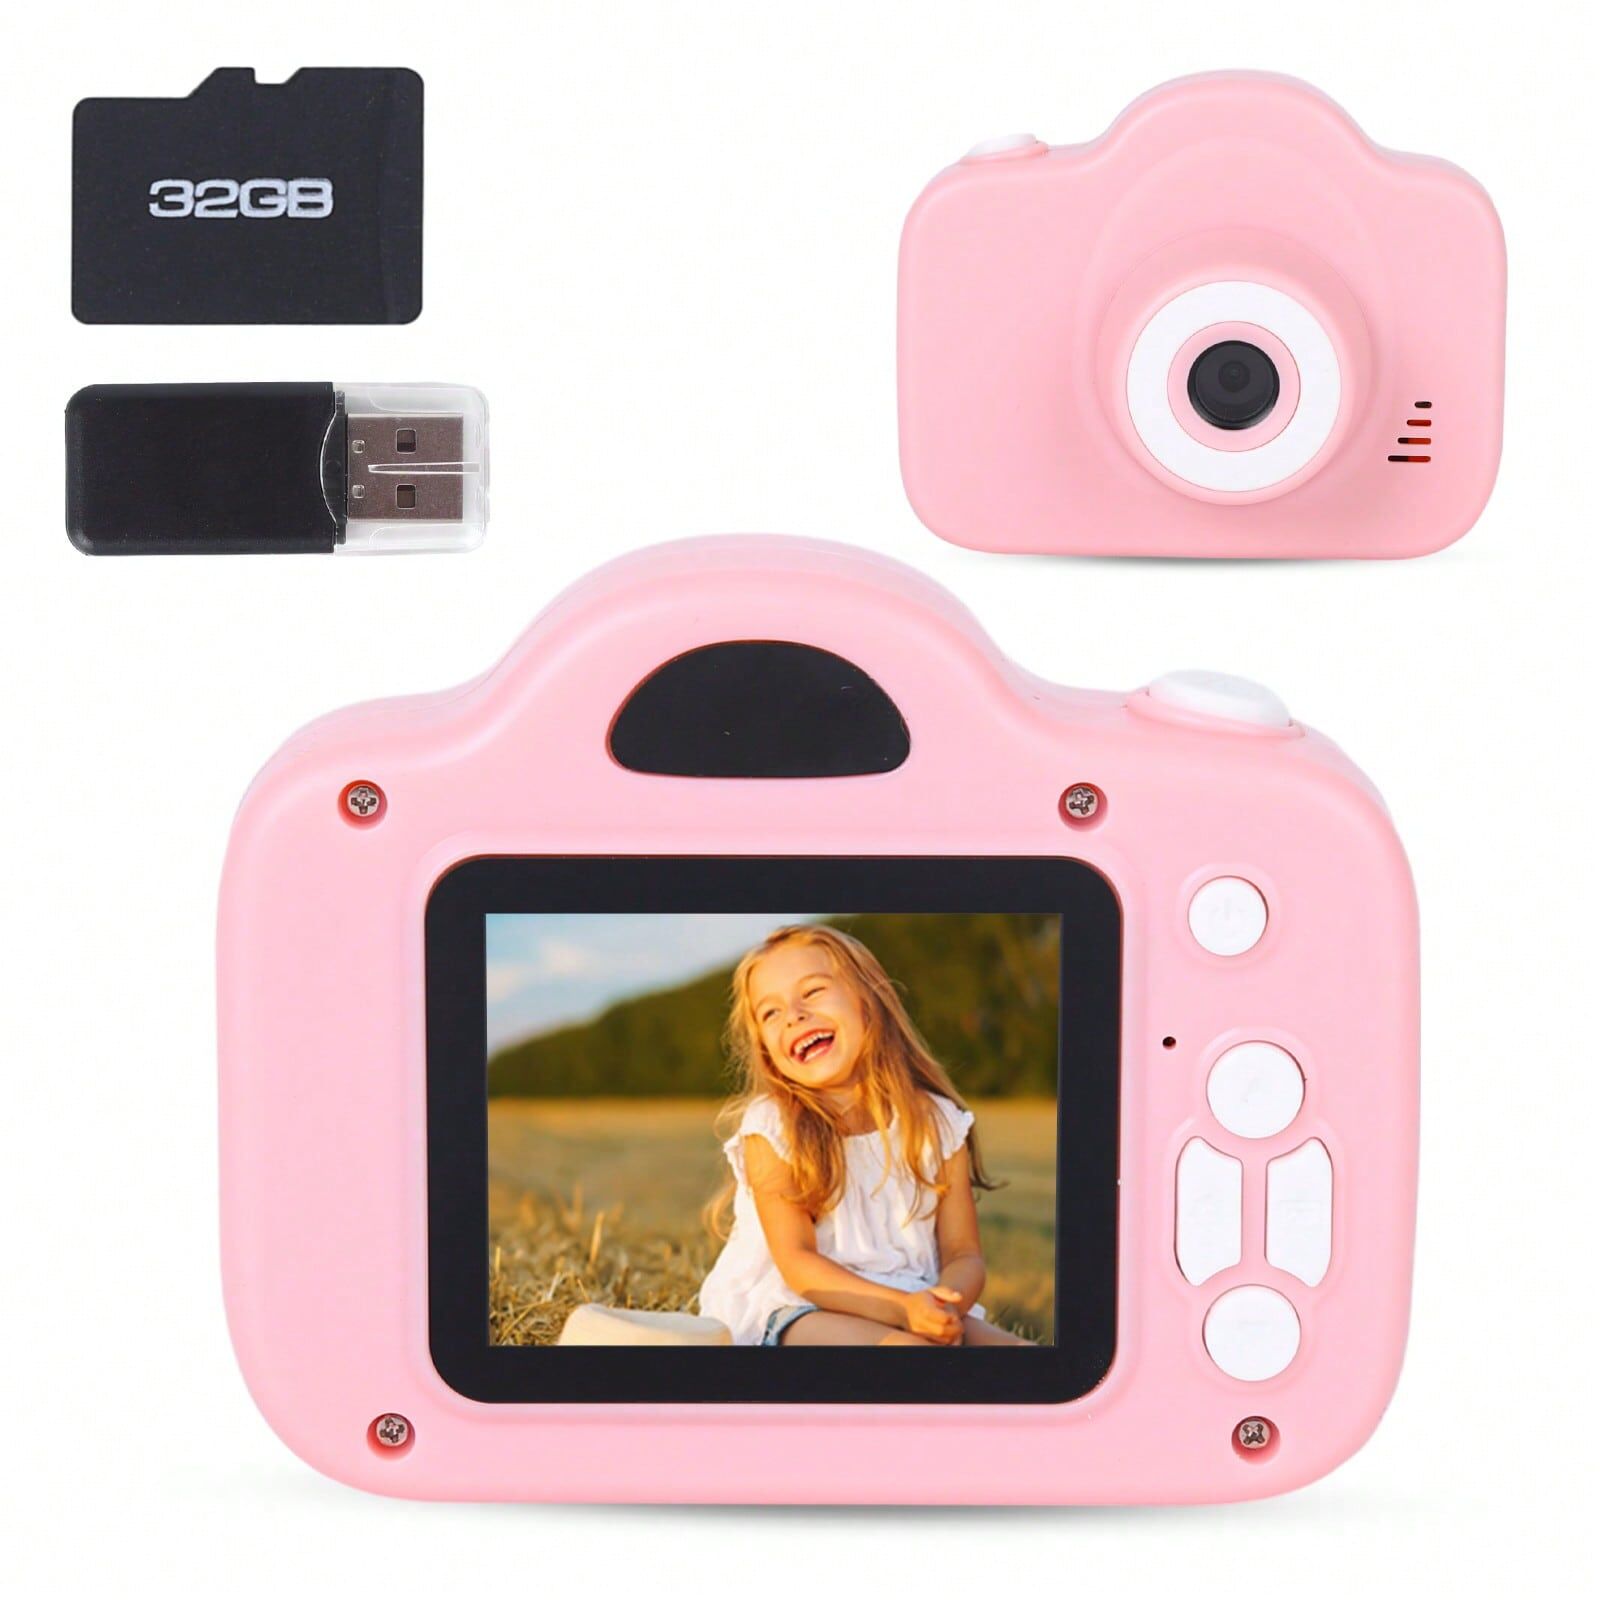 SHEIN Kids Camera,Digital Camera Kids Toys for 3-12 Years Girls Boys,1080P HD Video Camera with 32GB SD Card Kids Recorder for Unisex Kids Birthday Gift, Award Gift,New Year Gift (Pink) Pink one-size